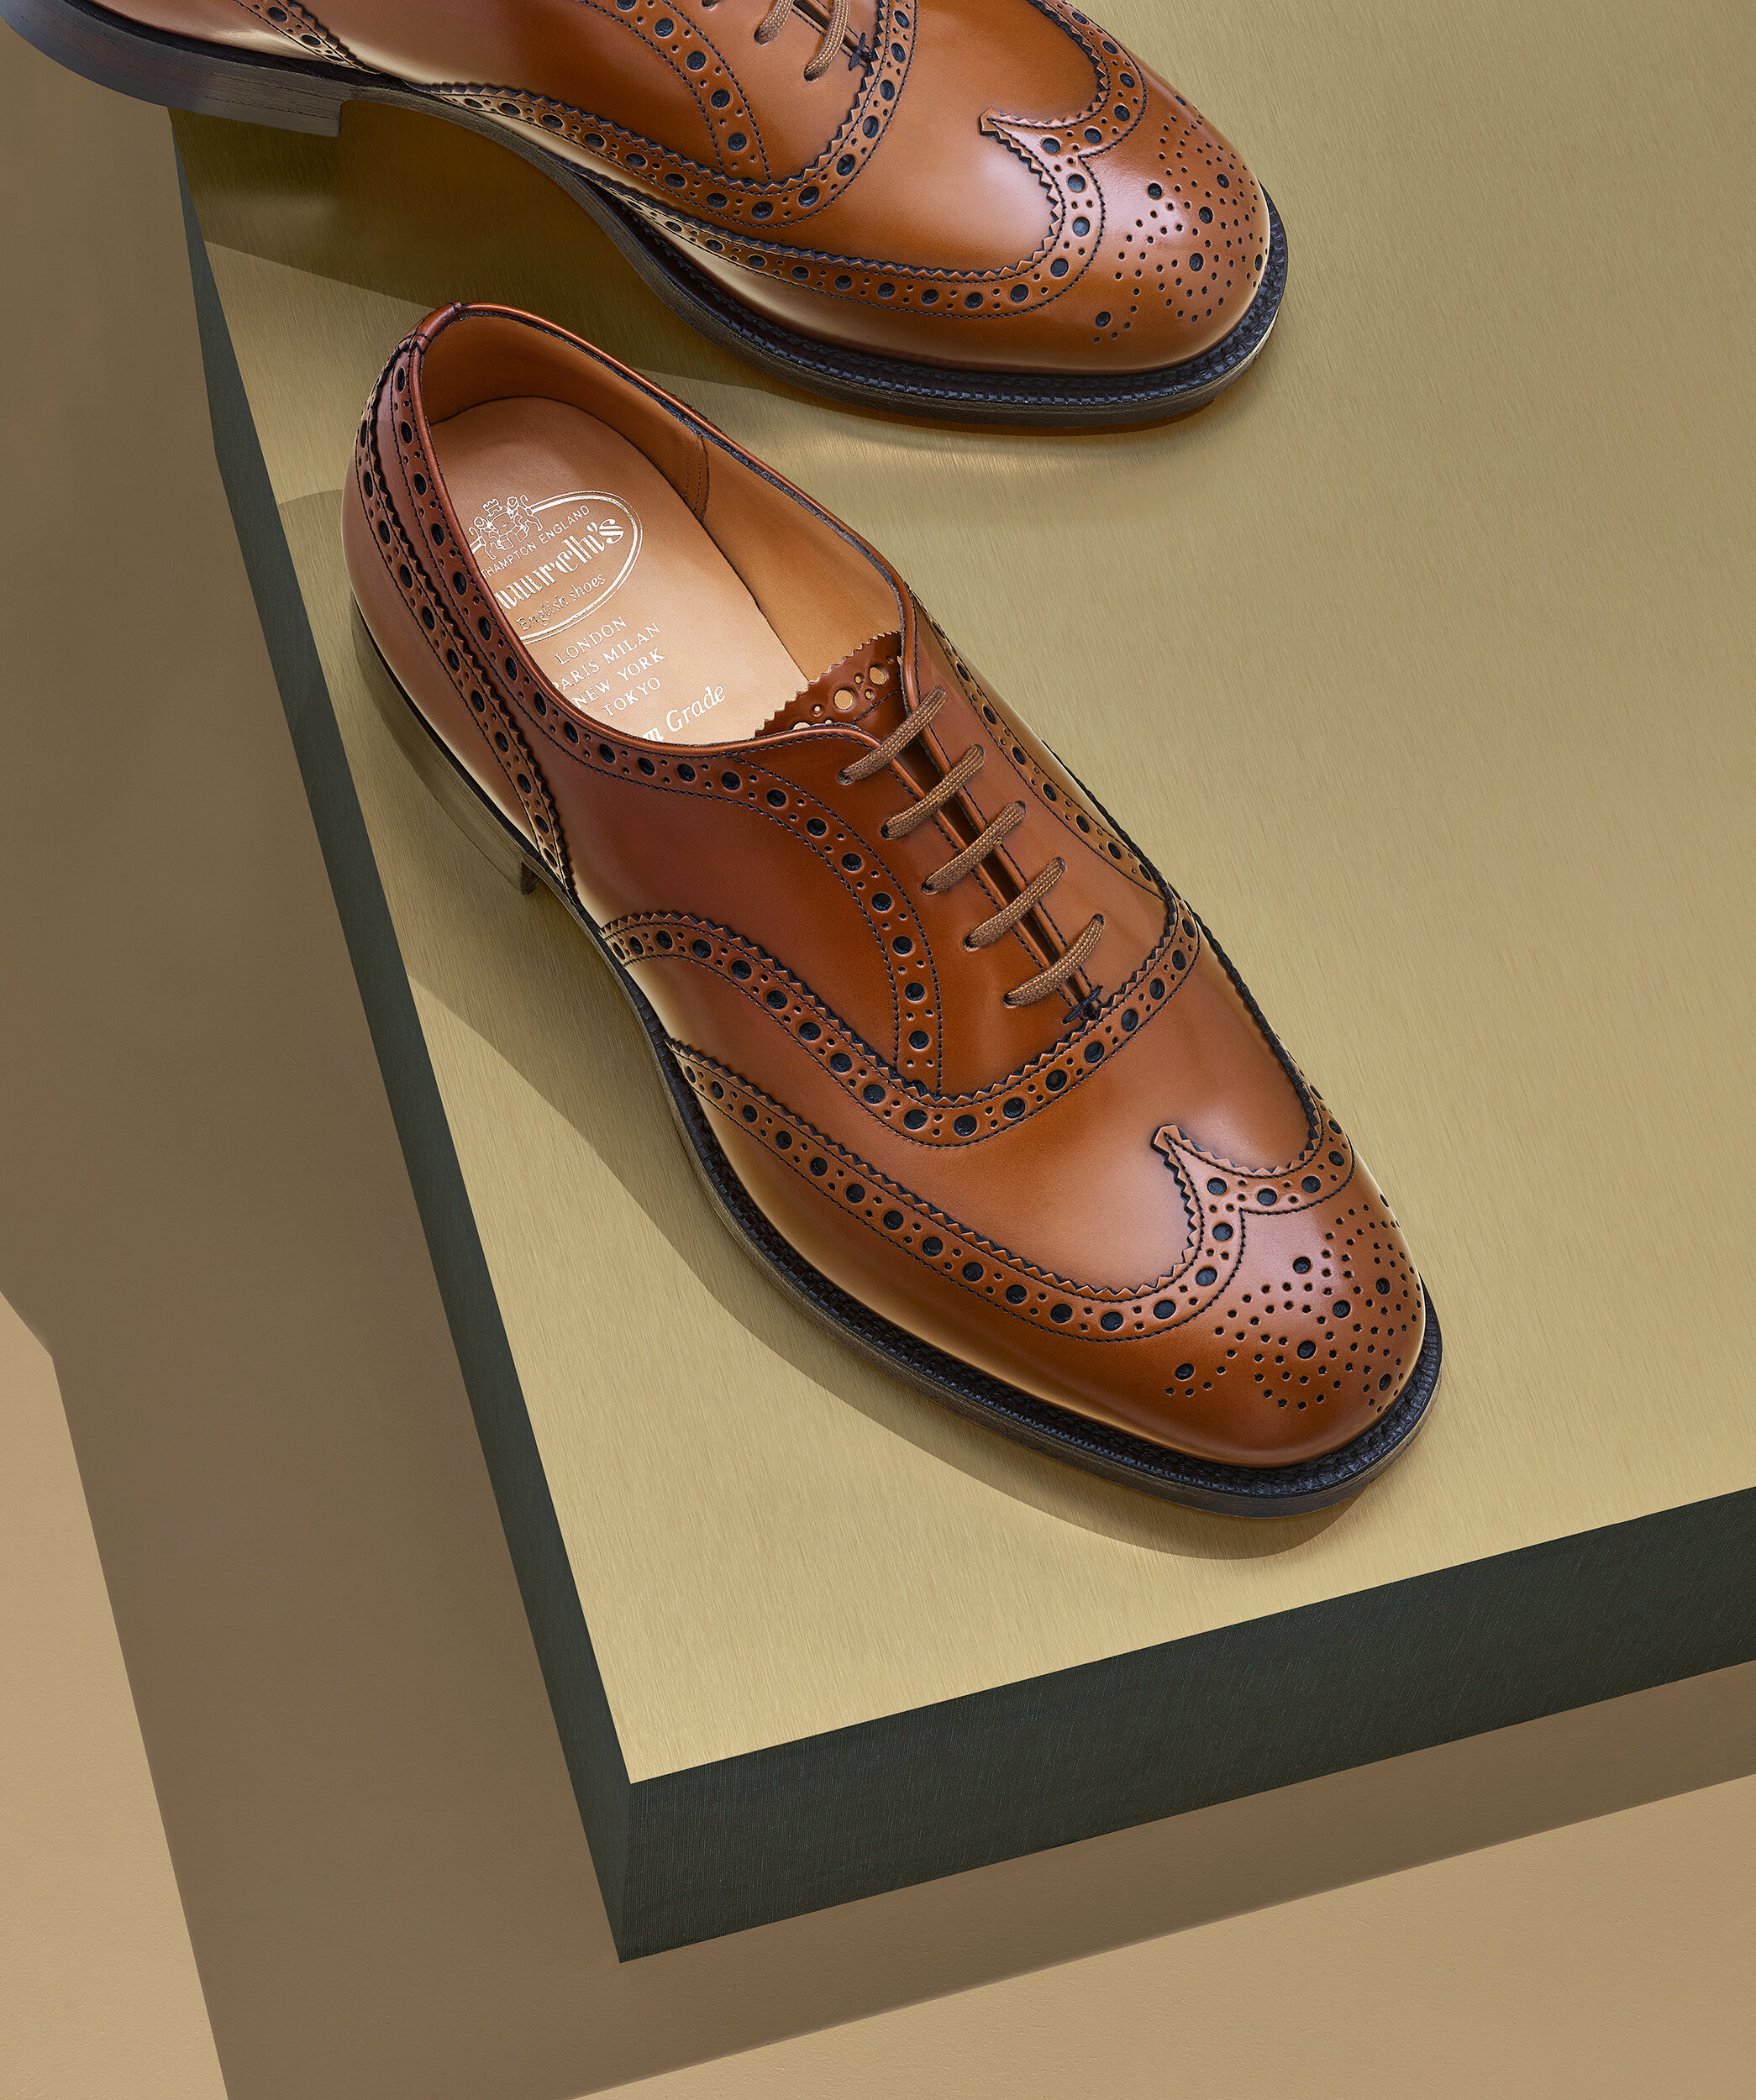  Brogue shoes by Church’s Shoes 